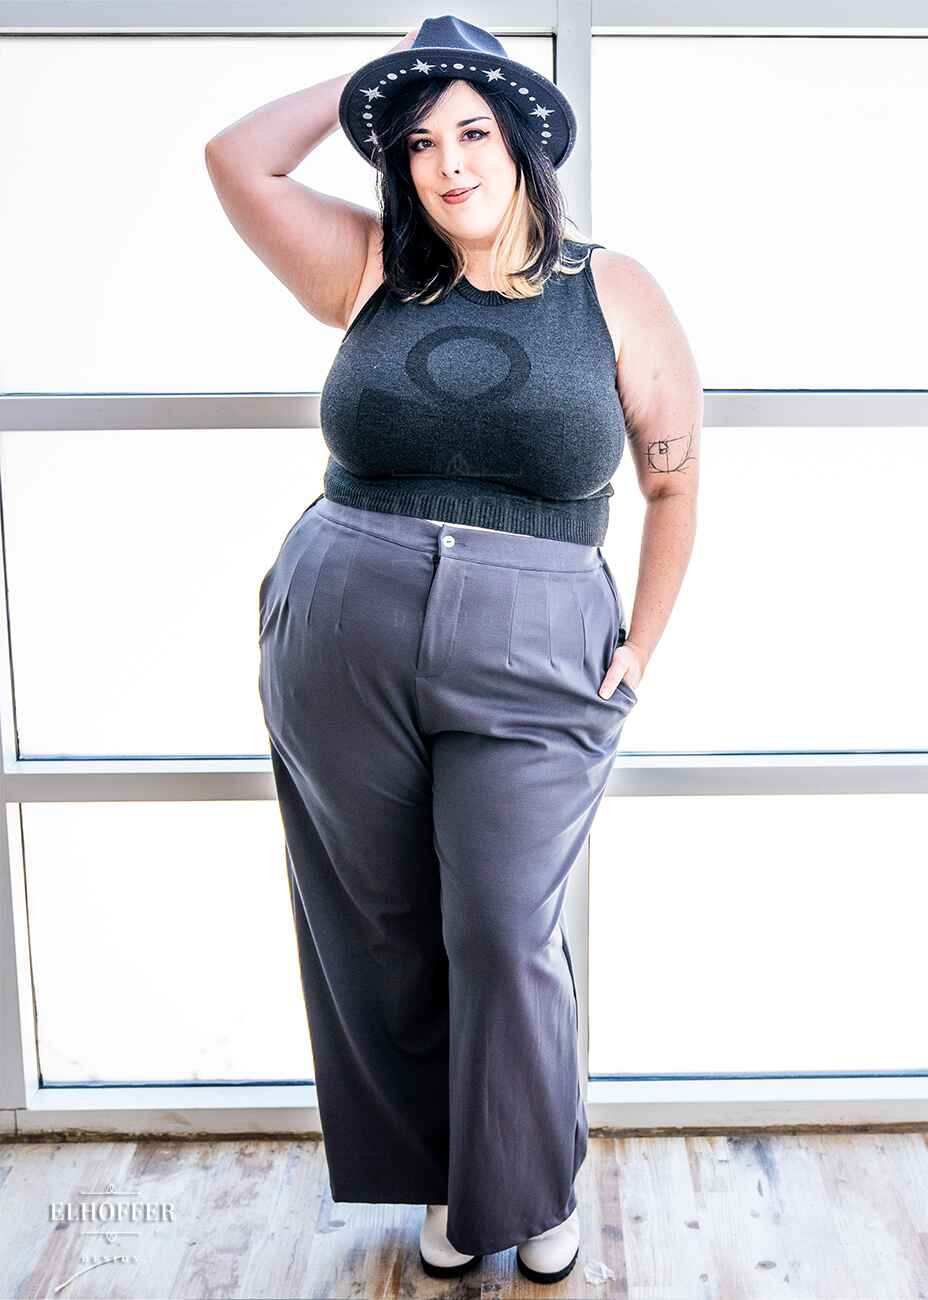 Katie Lynn, a fair skinned 2xl model with shoulder length black and blonde hair is wearing a dark grey sleeveless knit crop top with a large subtle ankh design on the front.  She paired the crop top with grey pleated trousers.